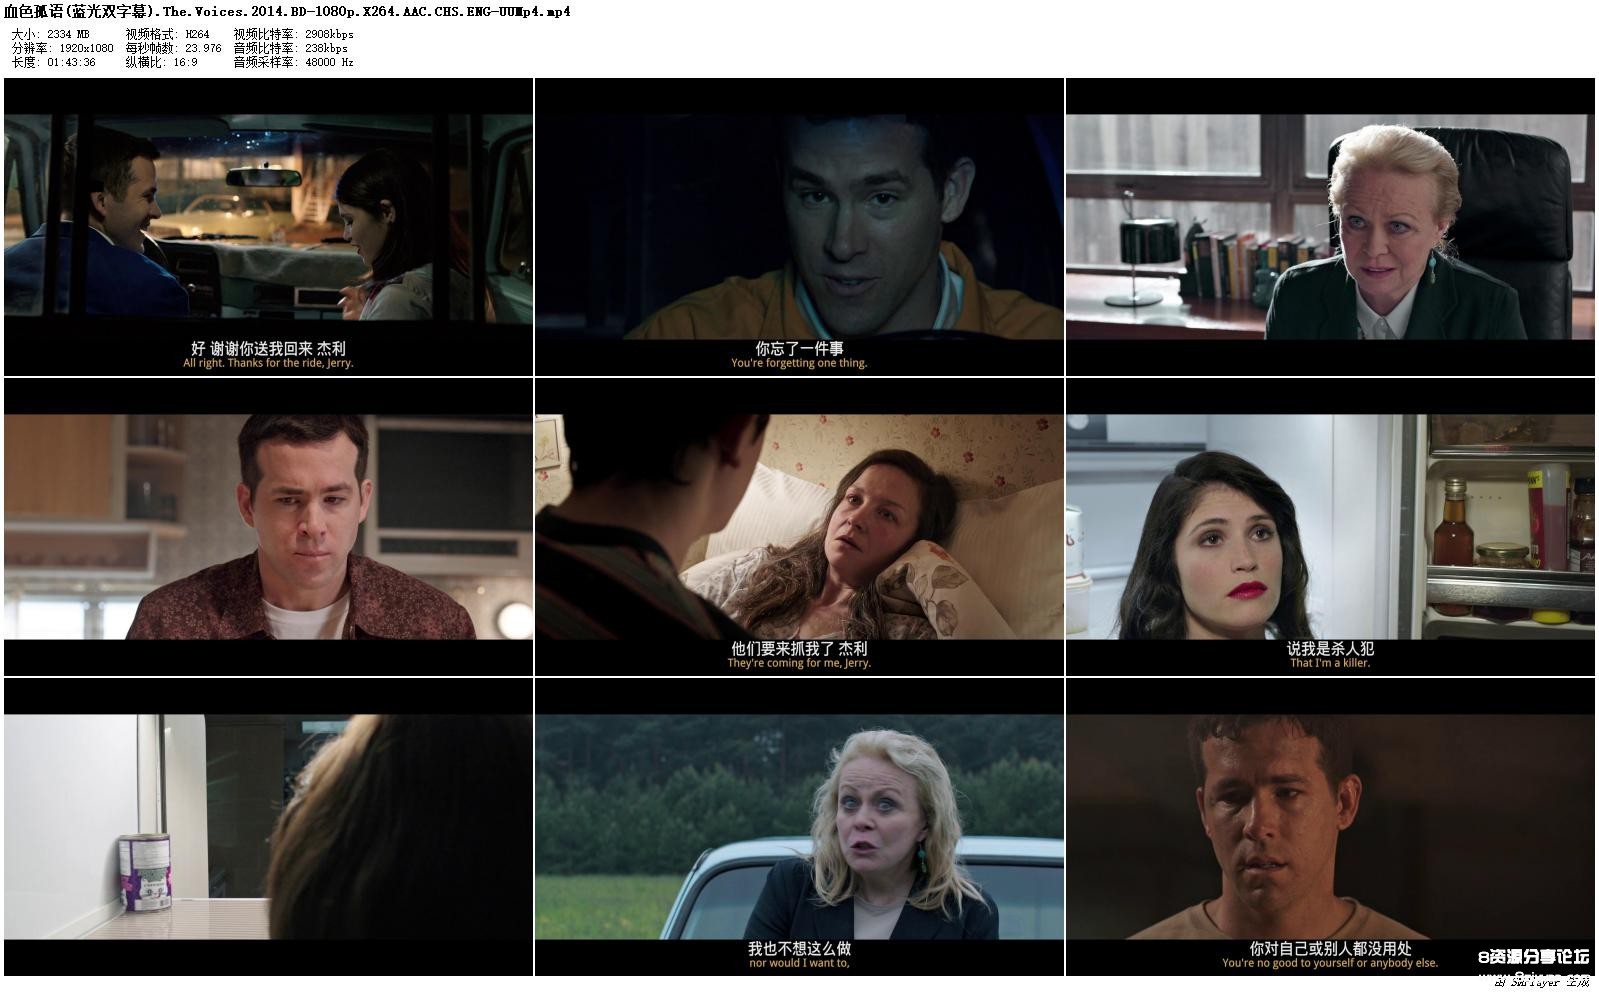 .The.Voices.2014.BD-1080p.X264.AAC.CHS.ENG-UUMp4_preview.jpg